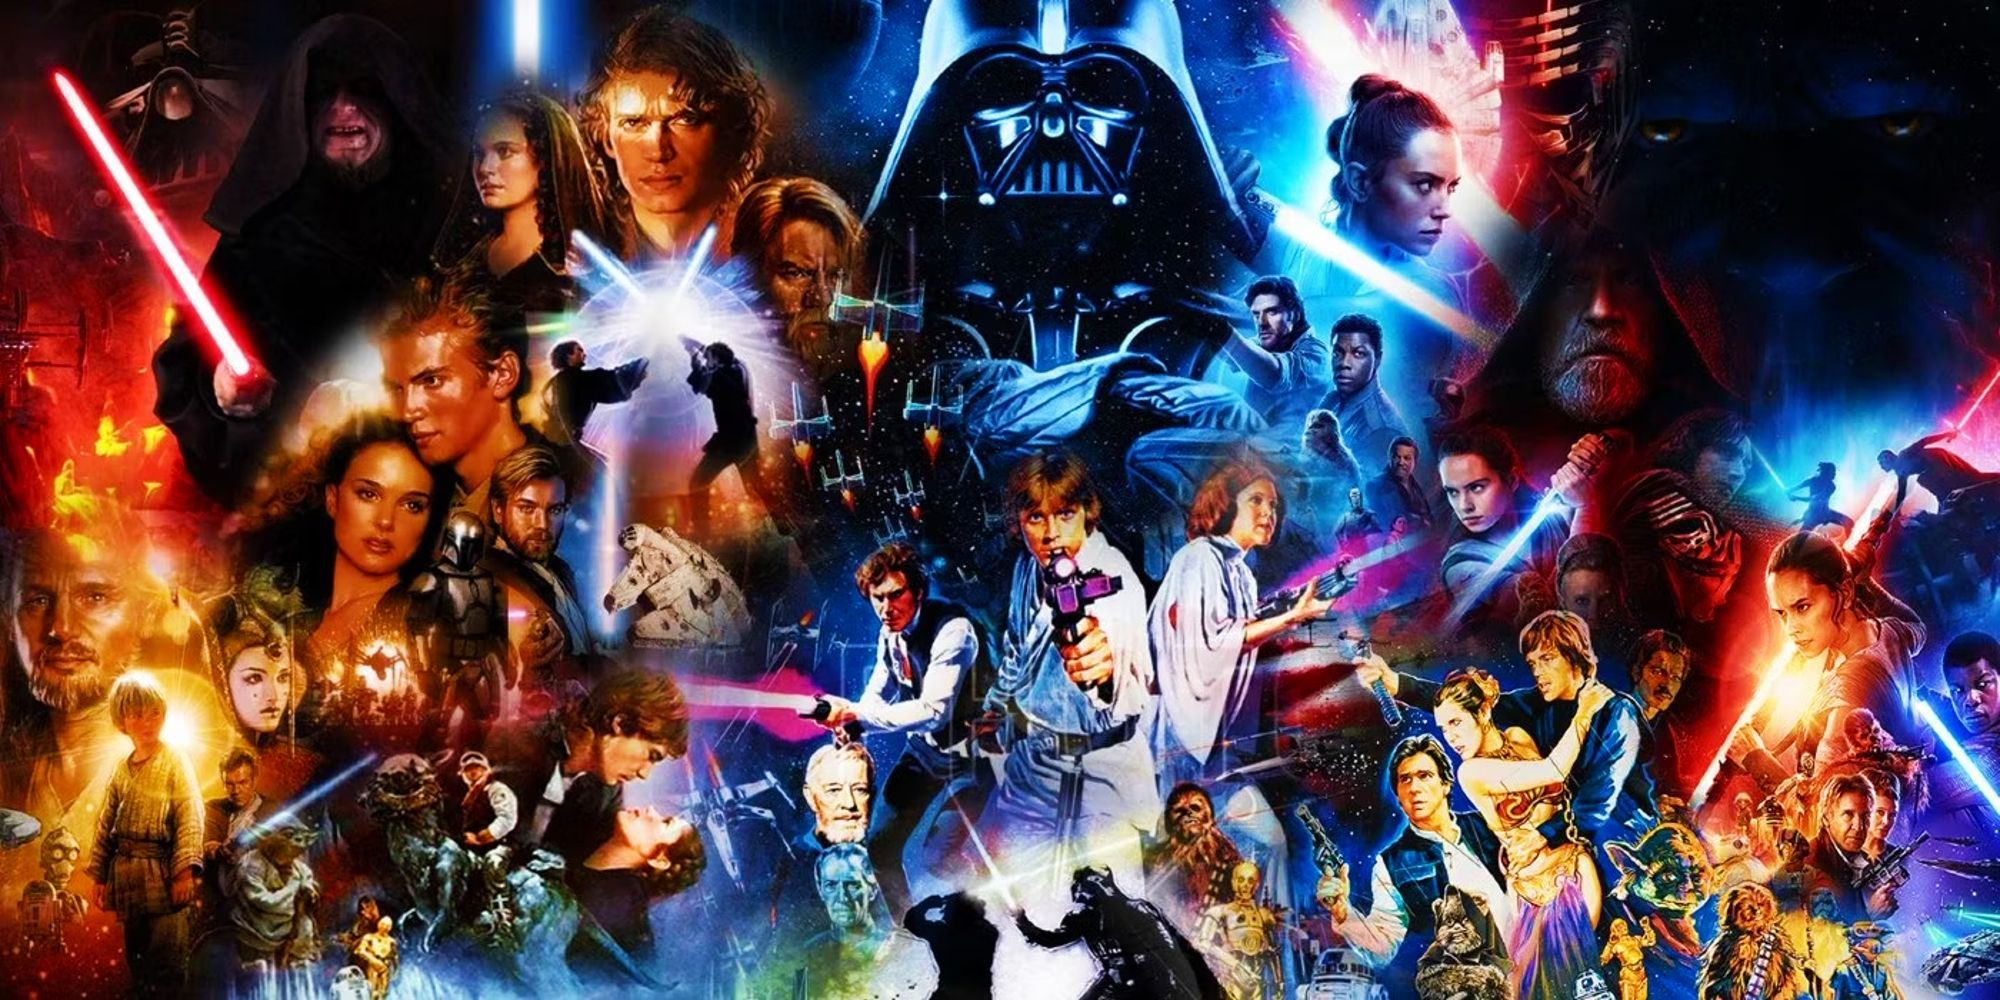 skywalker-saga-marathon-coming-to-theaters-as-part-of-the-most-exciting-star-wars-day-celebration-ever